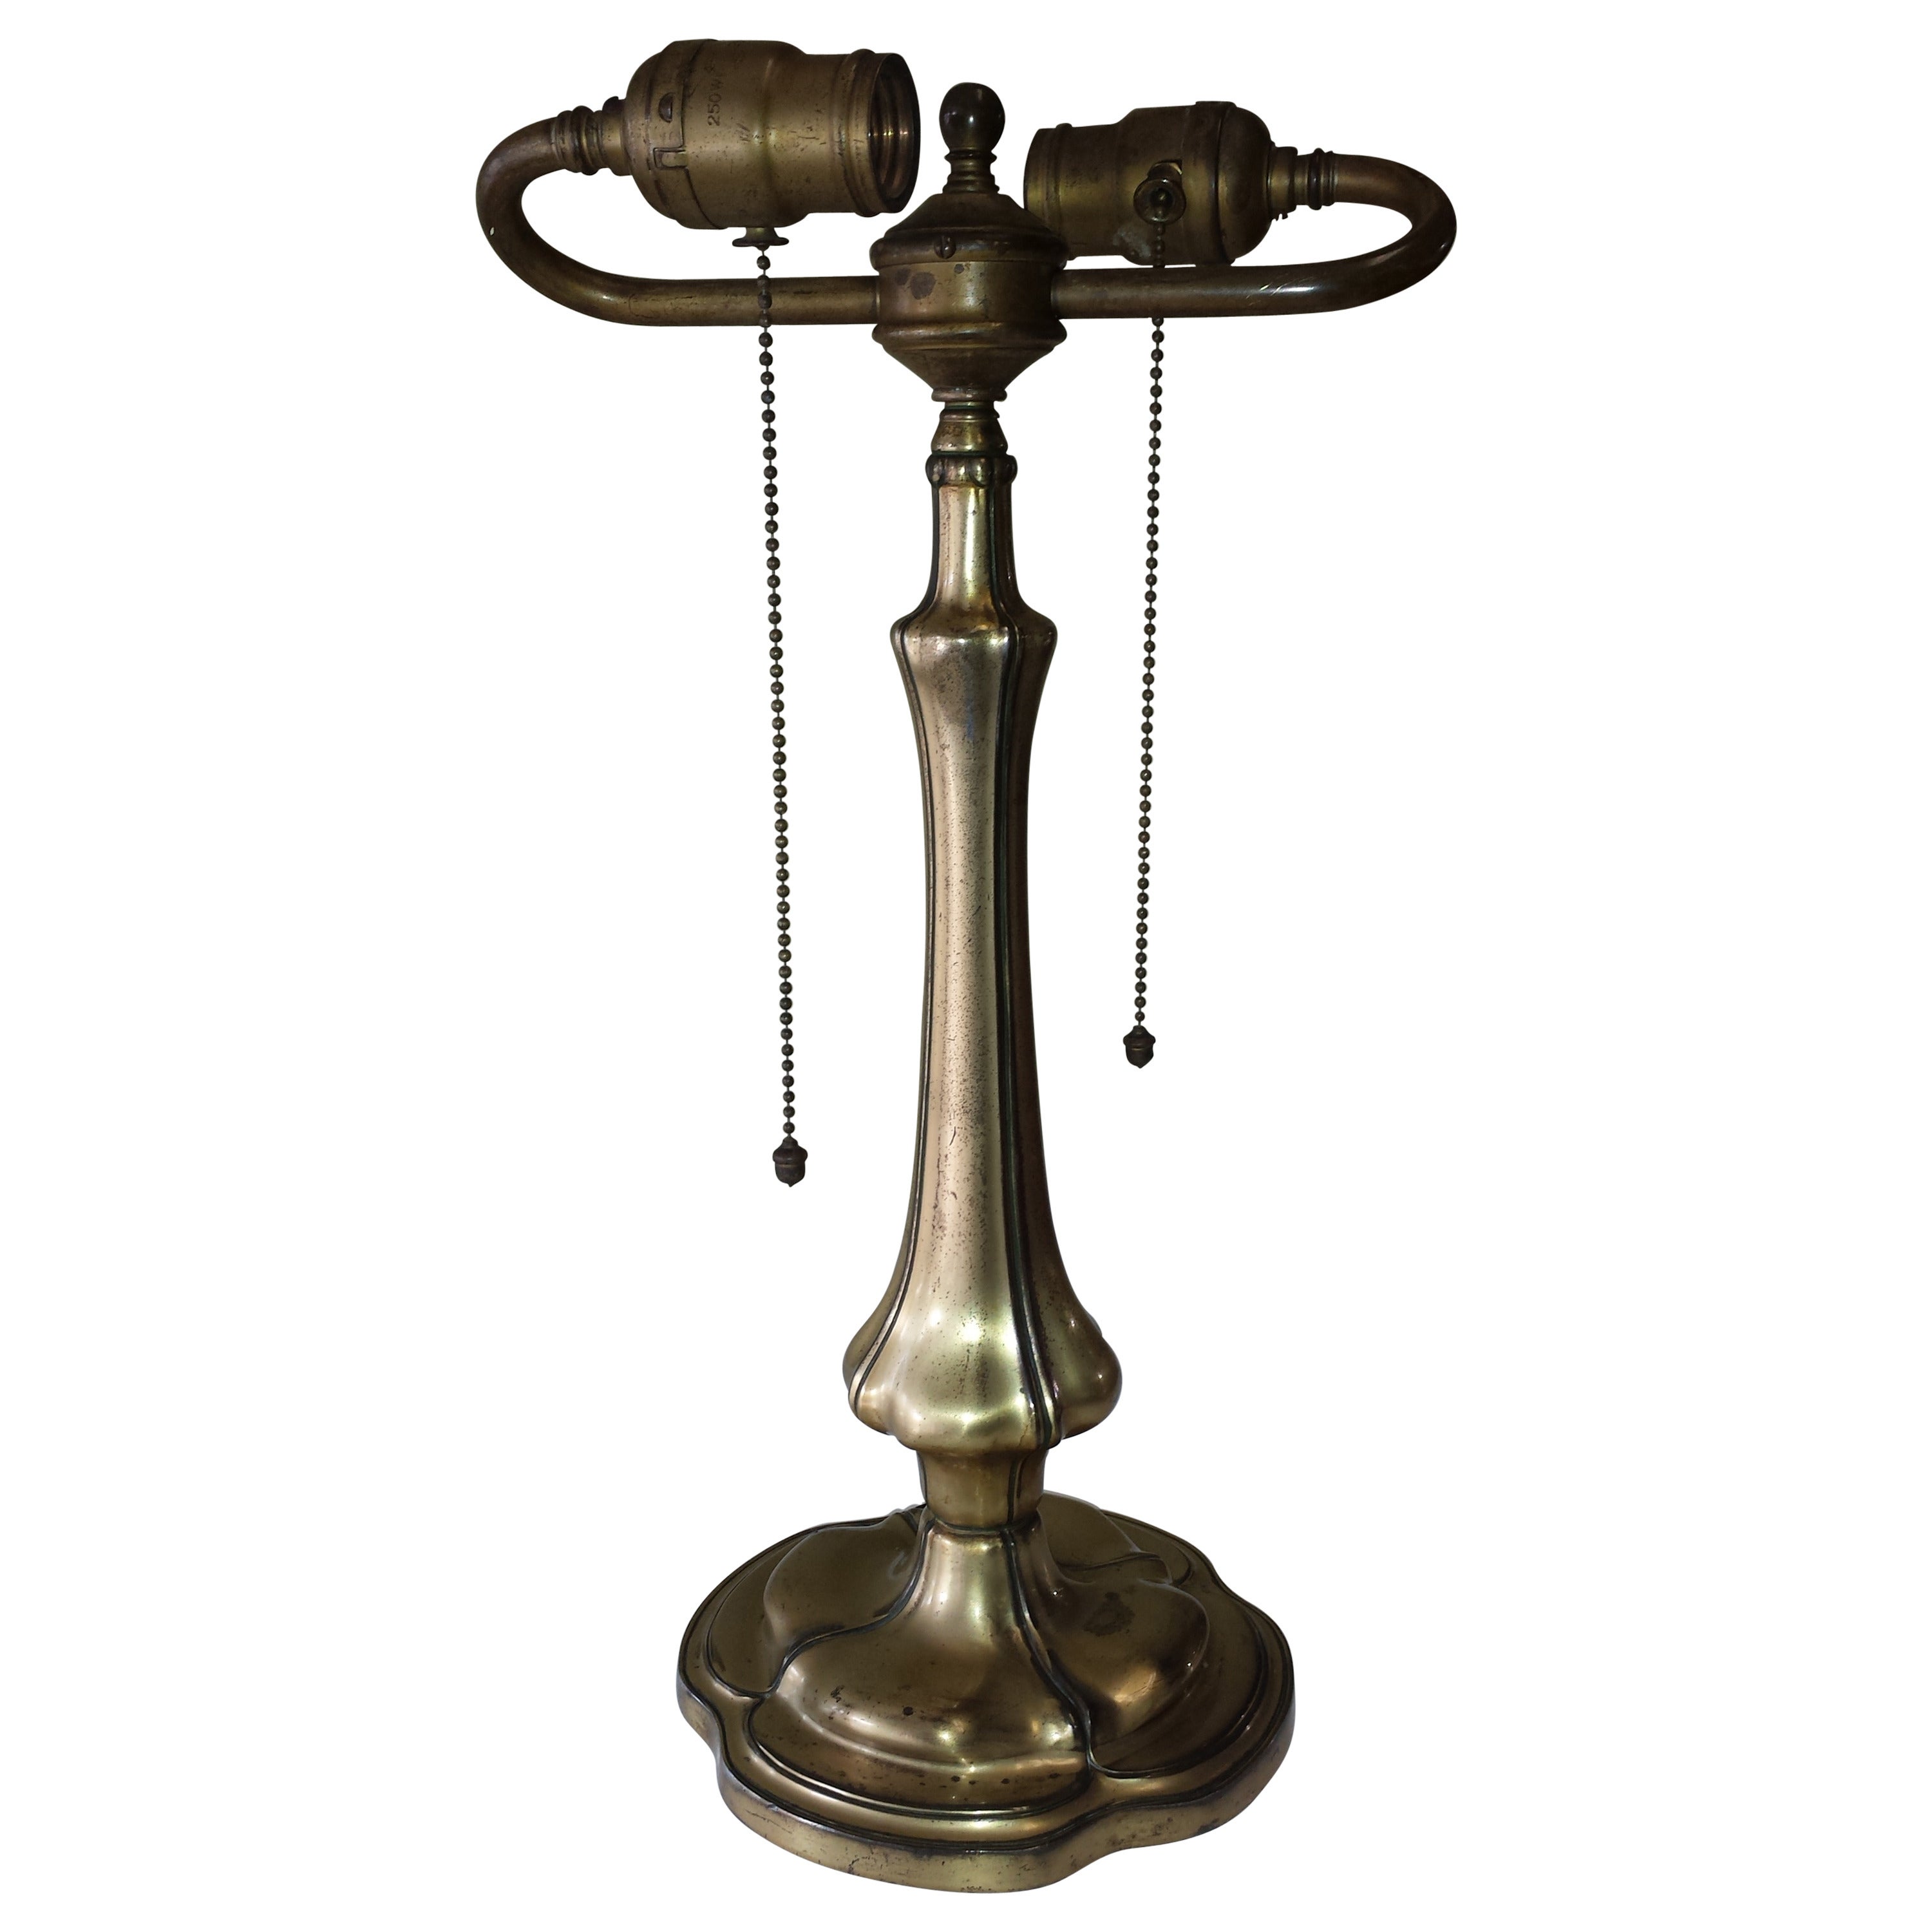 Pairpoint Table Lamp Base in an Antique Brass Finish with Double Sockets